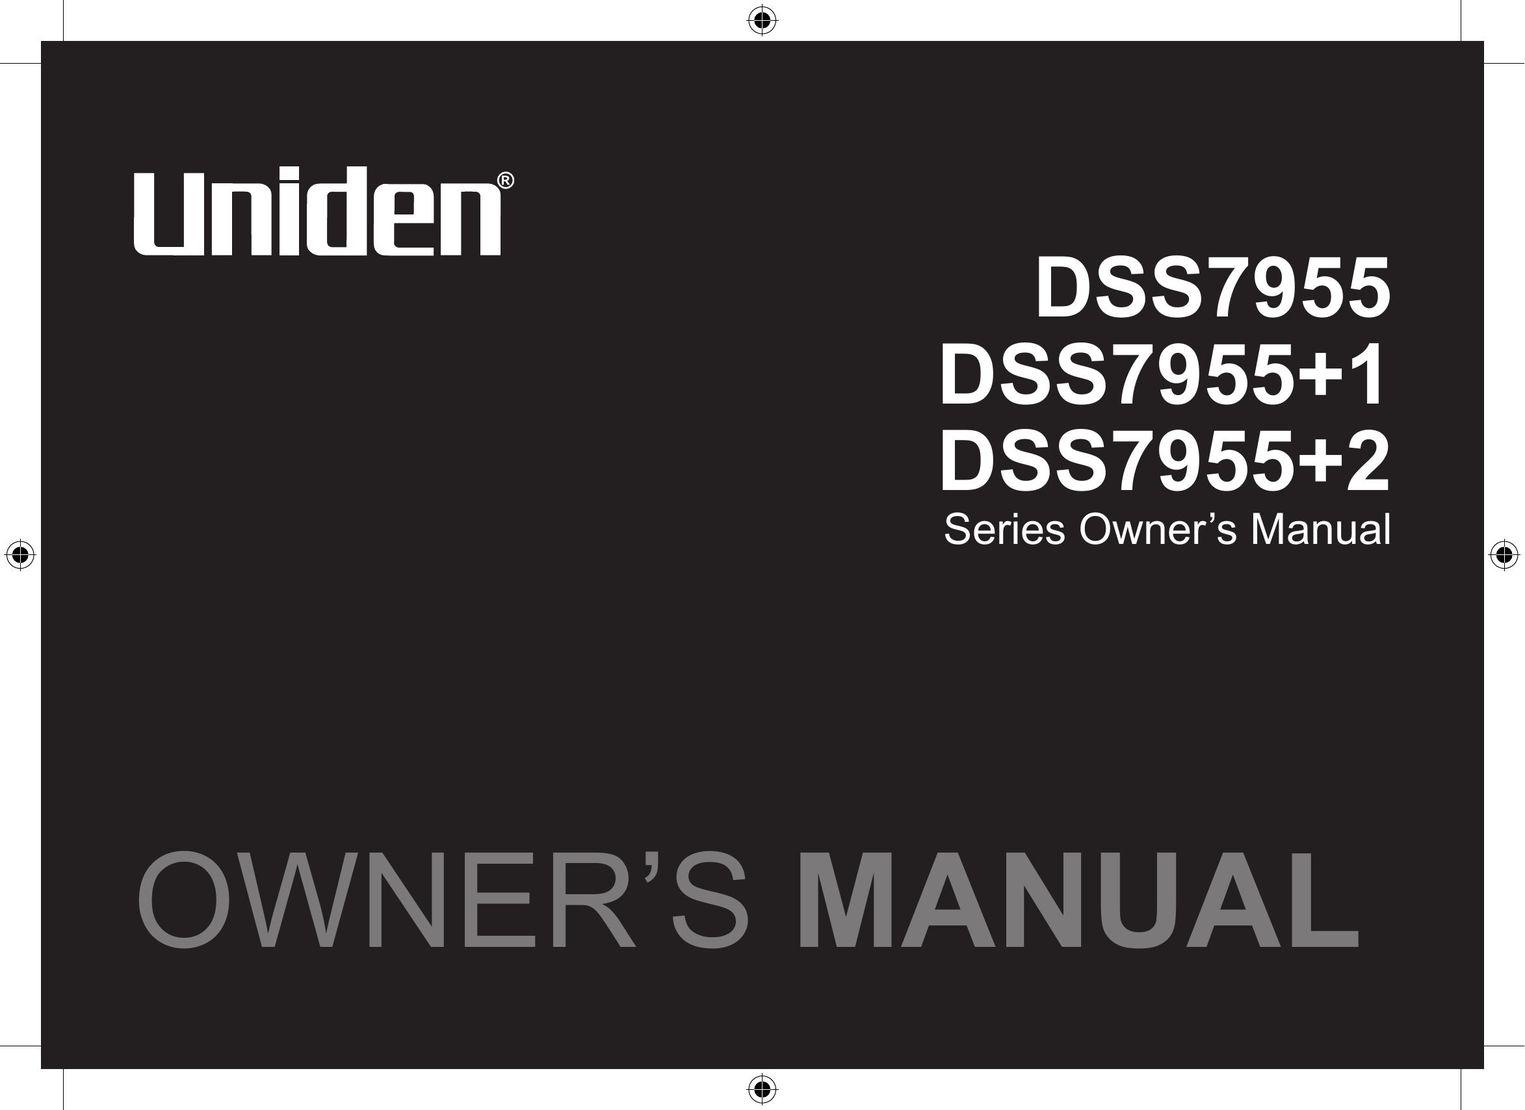 Uniden DSS7955+2 Telephone User Manual